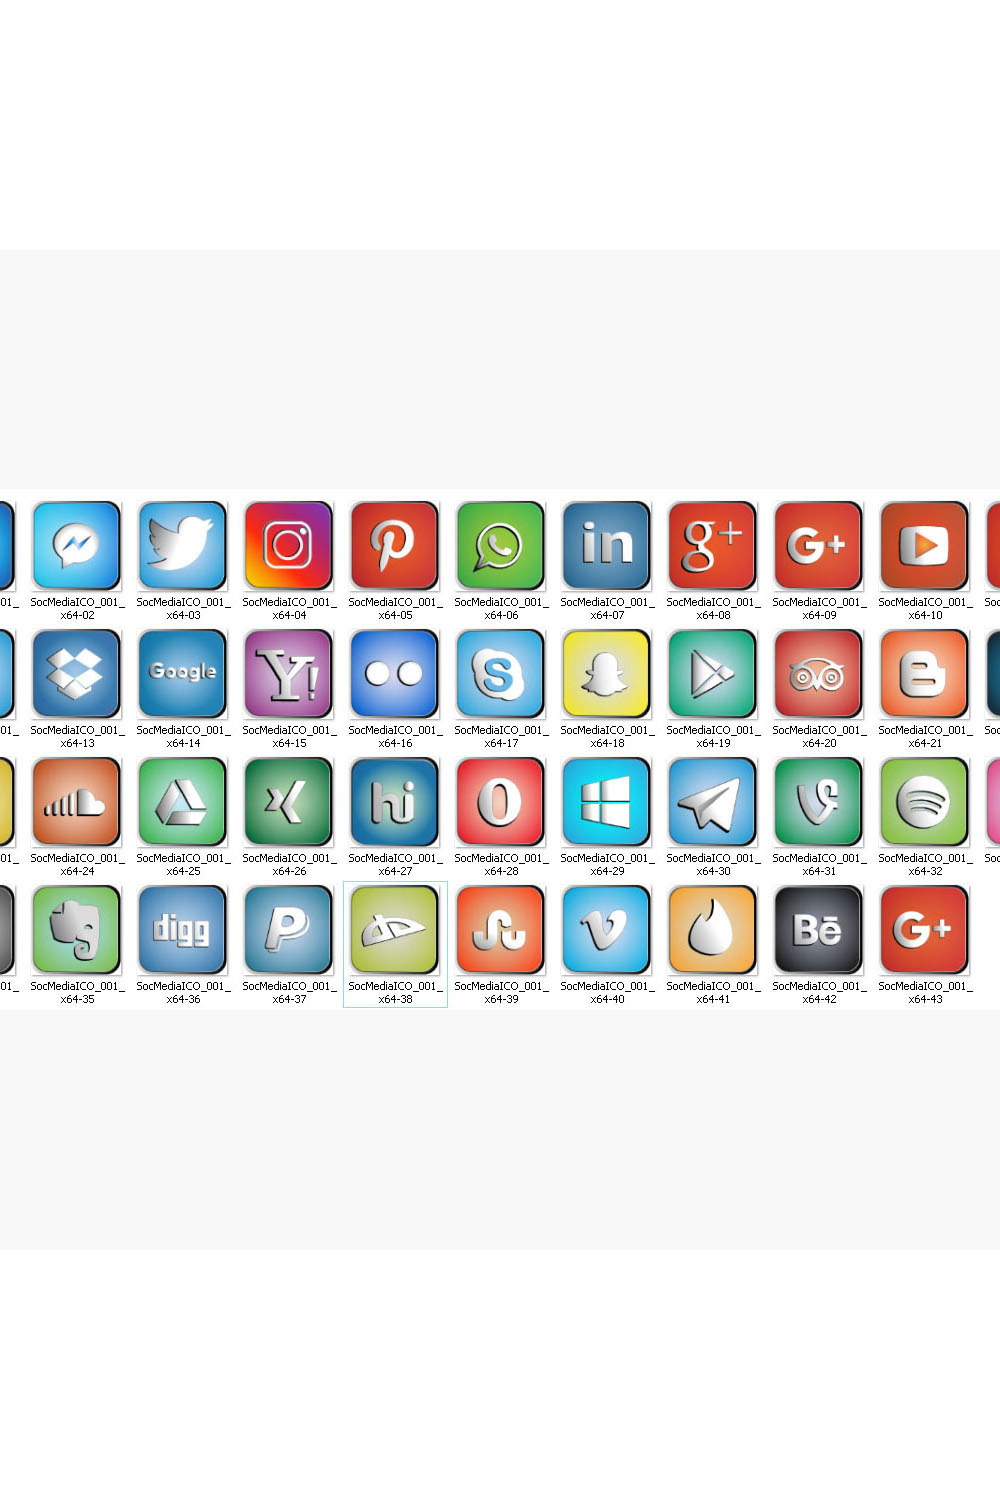 40+ Apps Icons With Vector Source - Pinterest image preview.